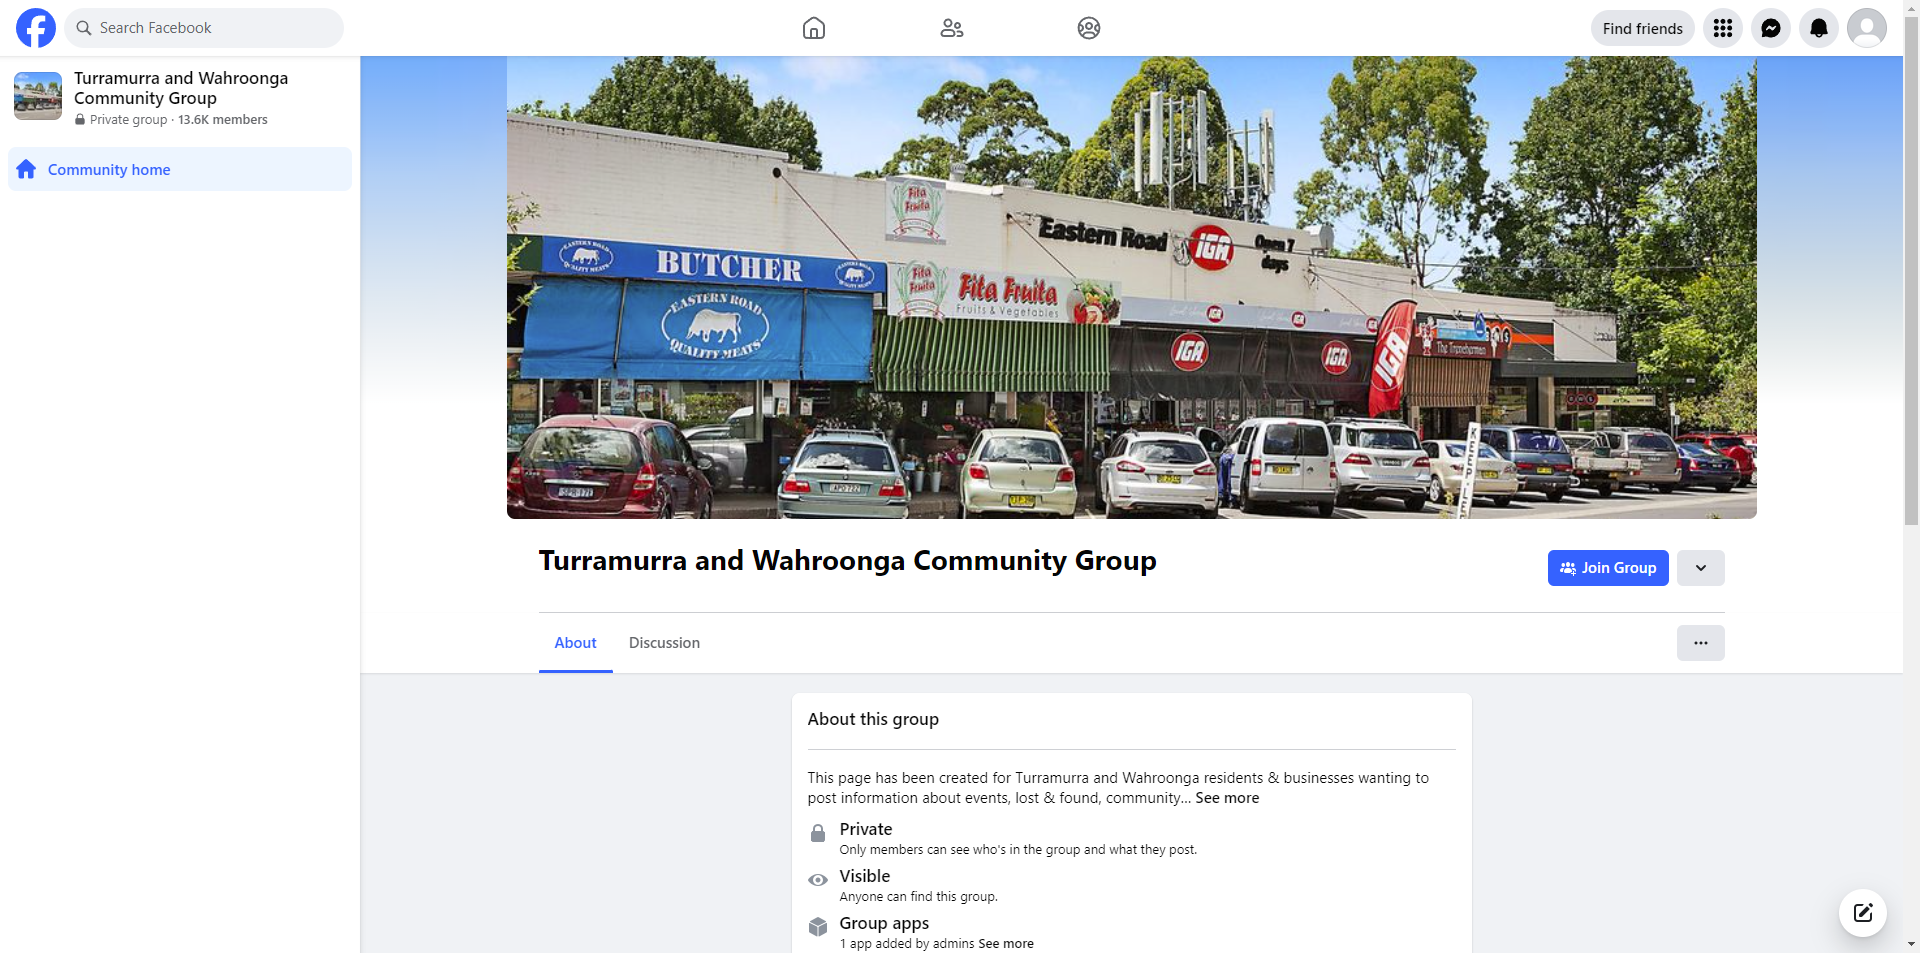 Turramurra and Wahroonga Community Group